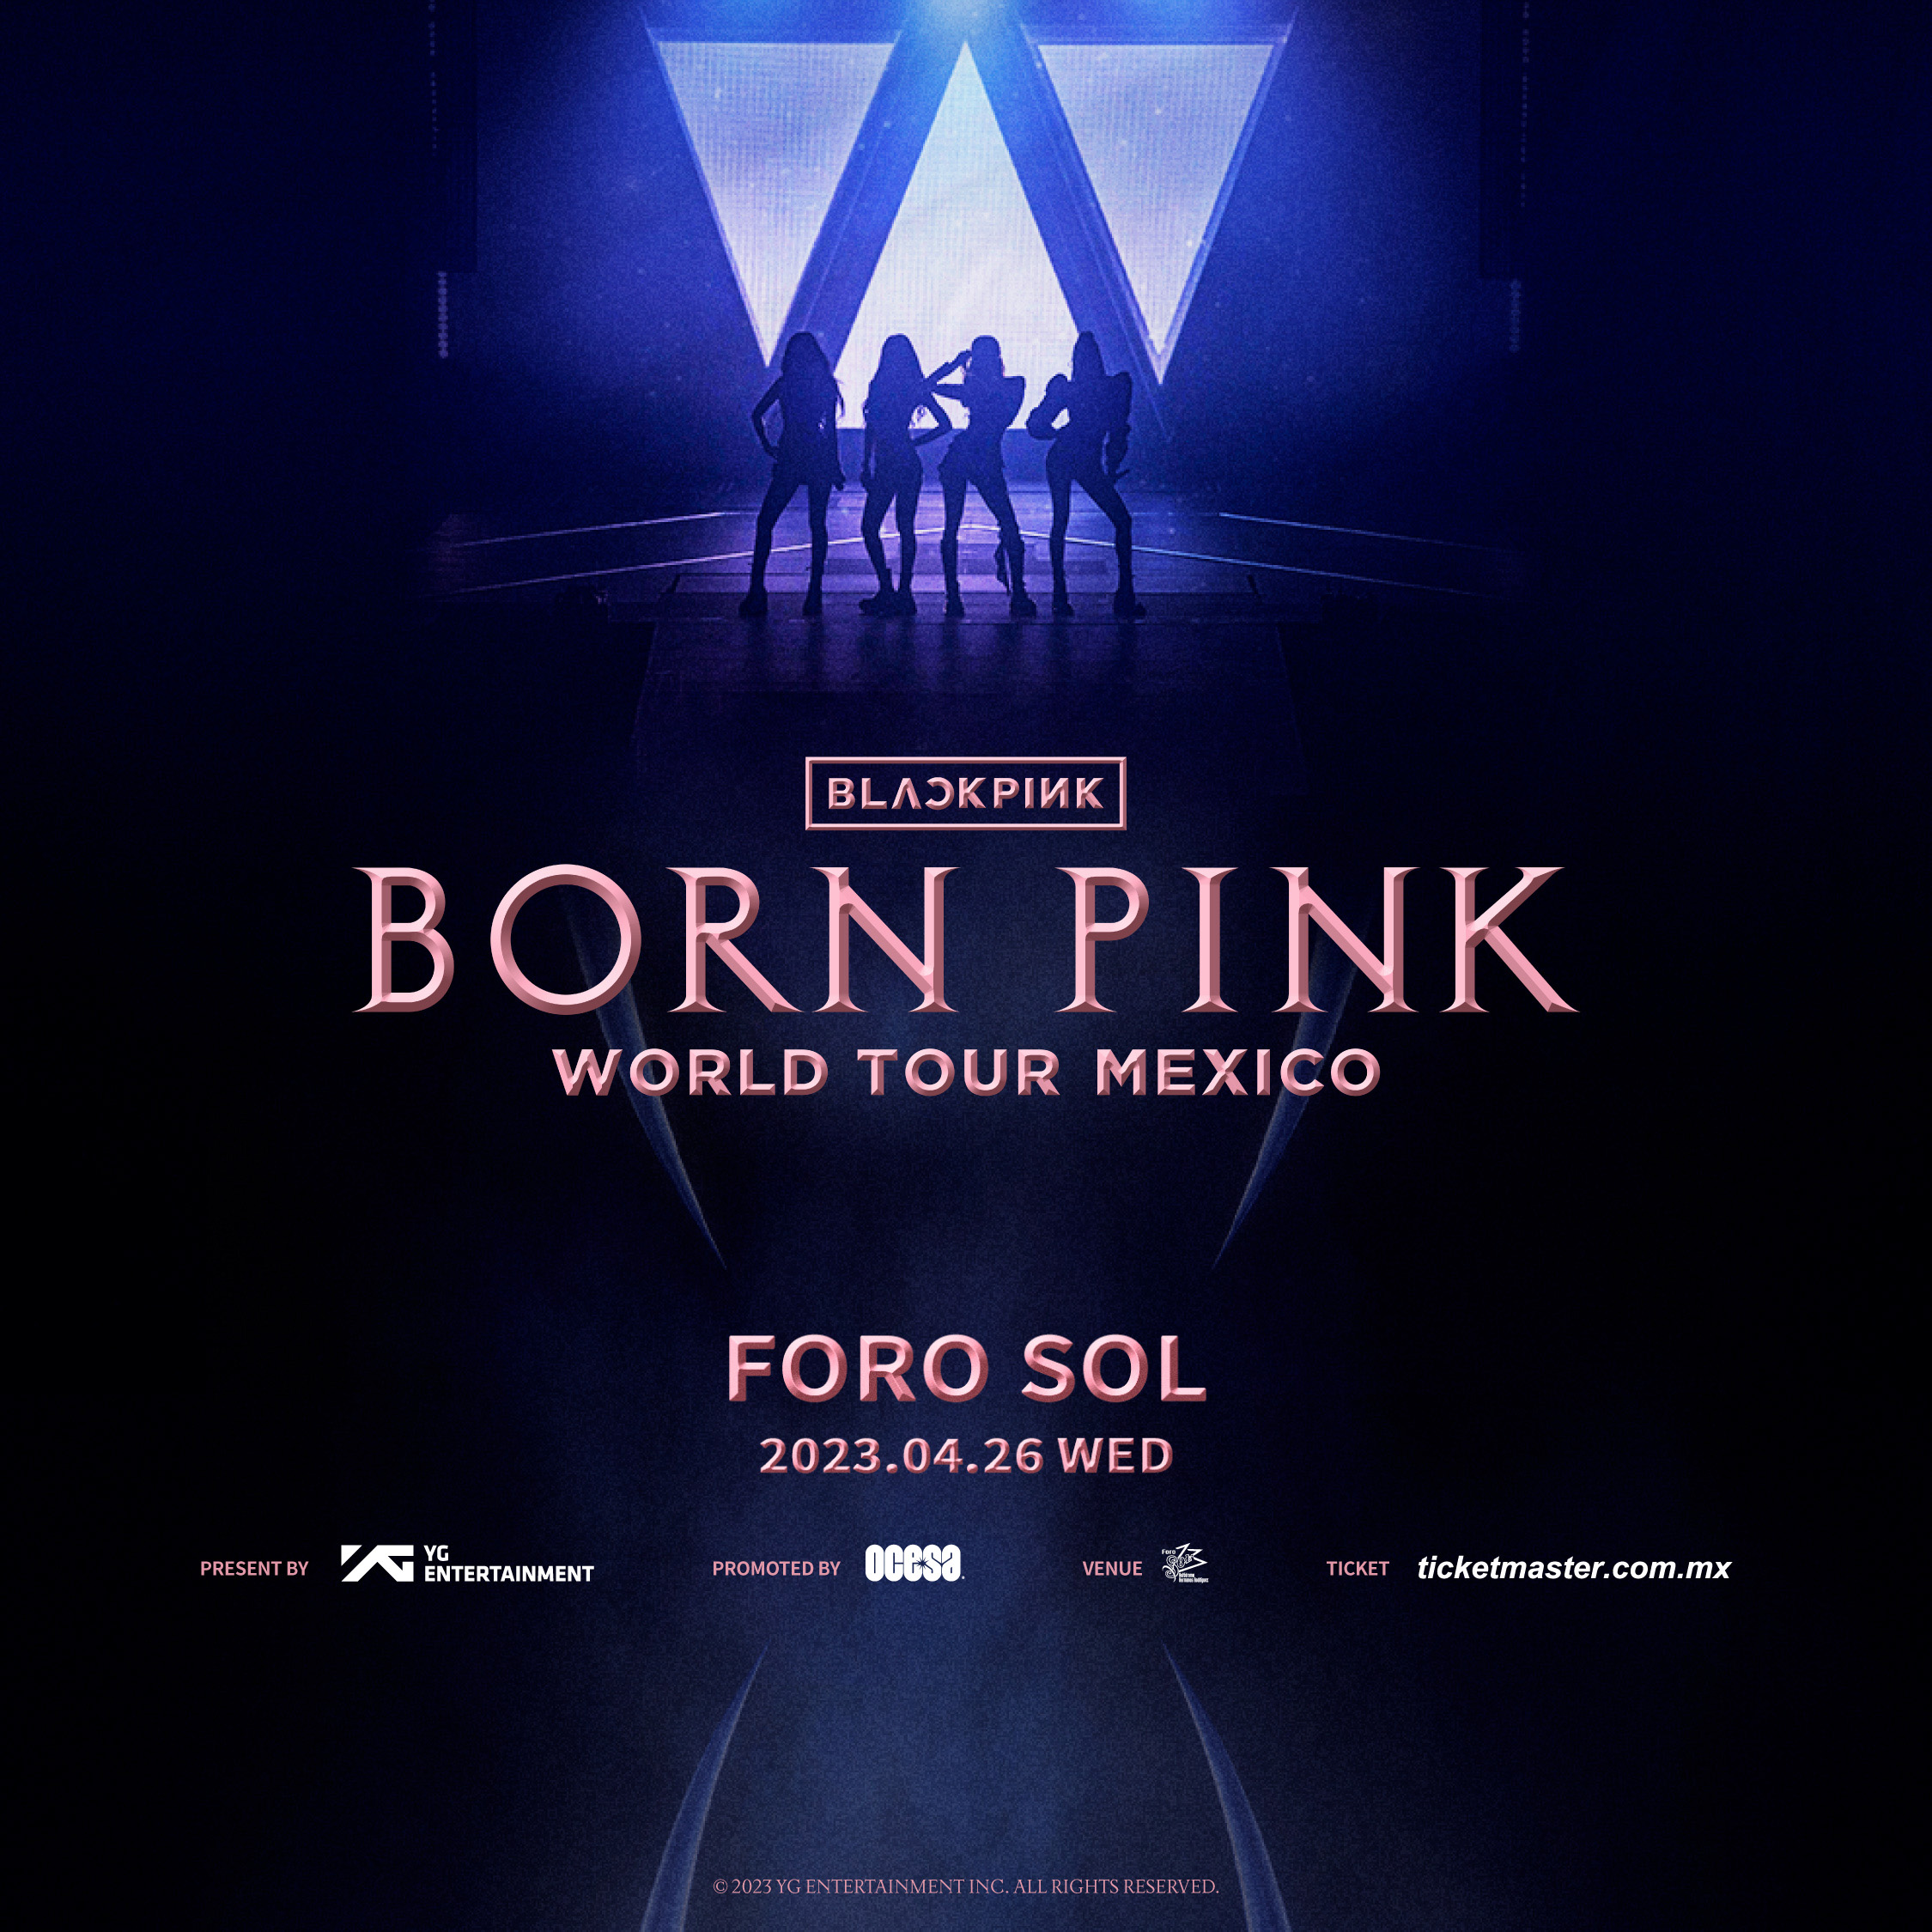 Presale and everything you need to know about the Blackpink concert in Mexico